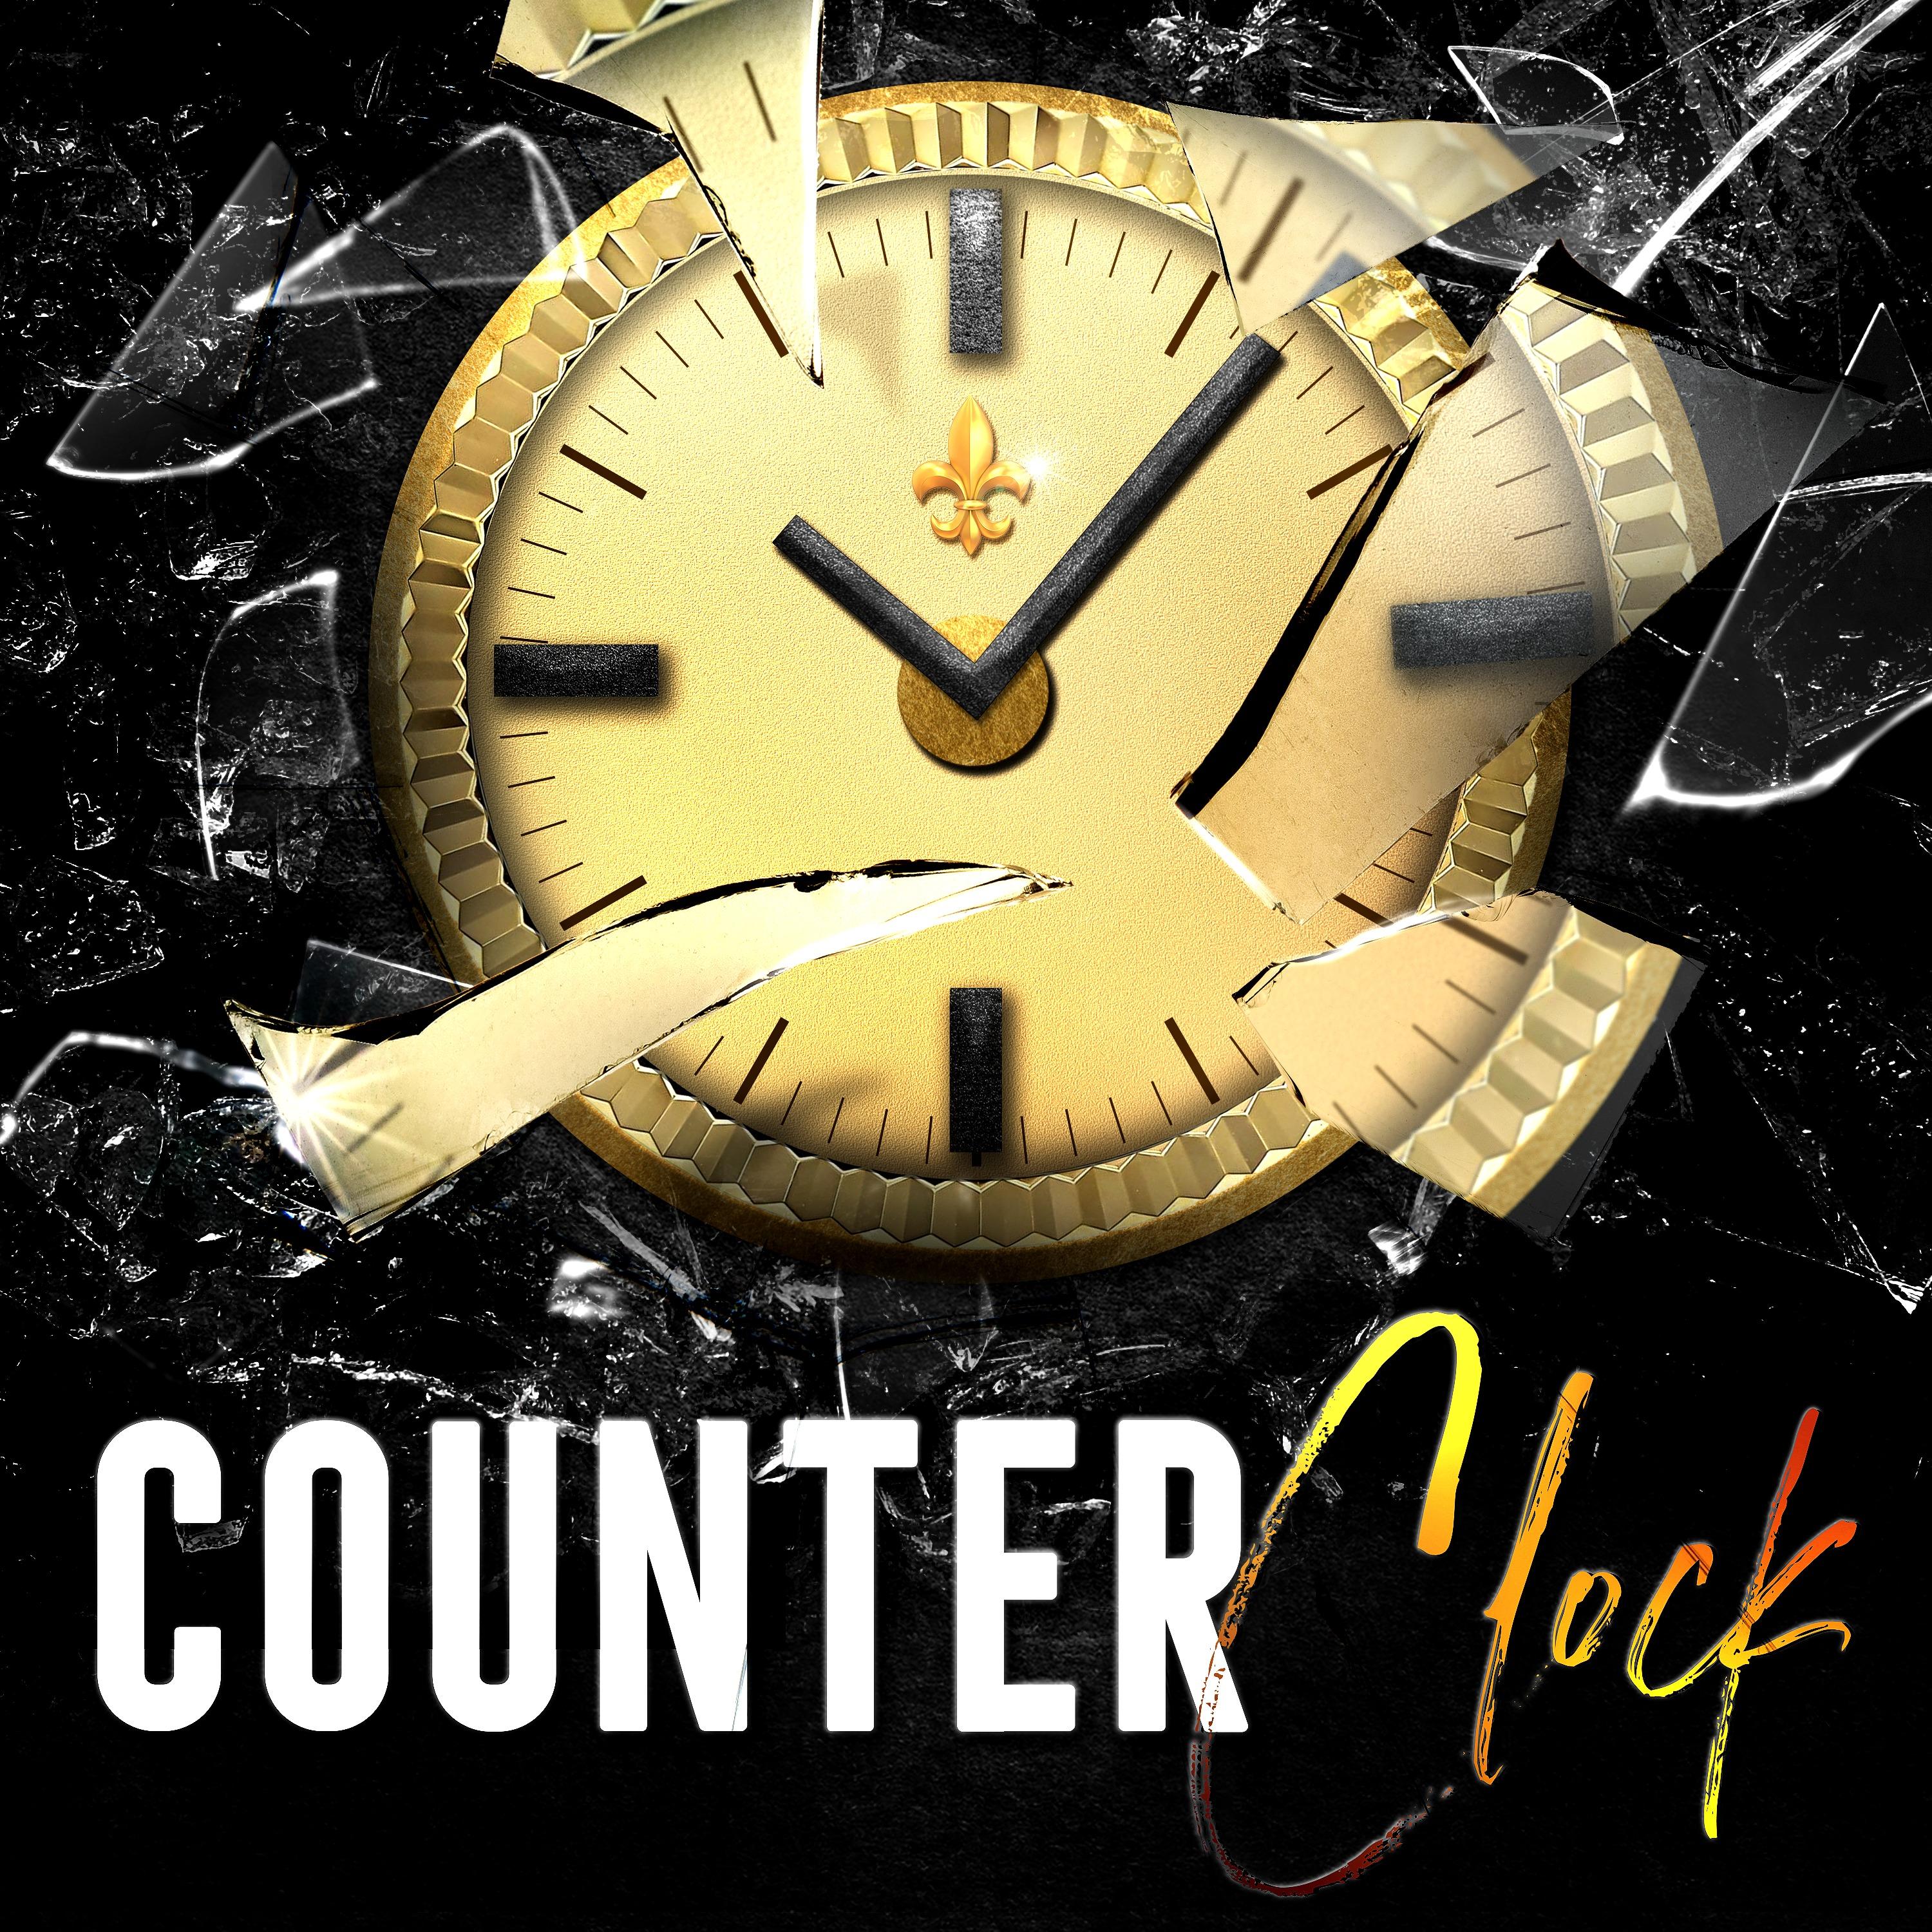 Show poster of CounterClock